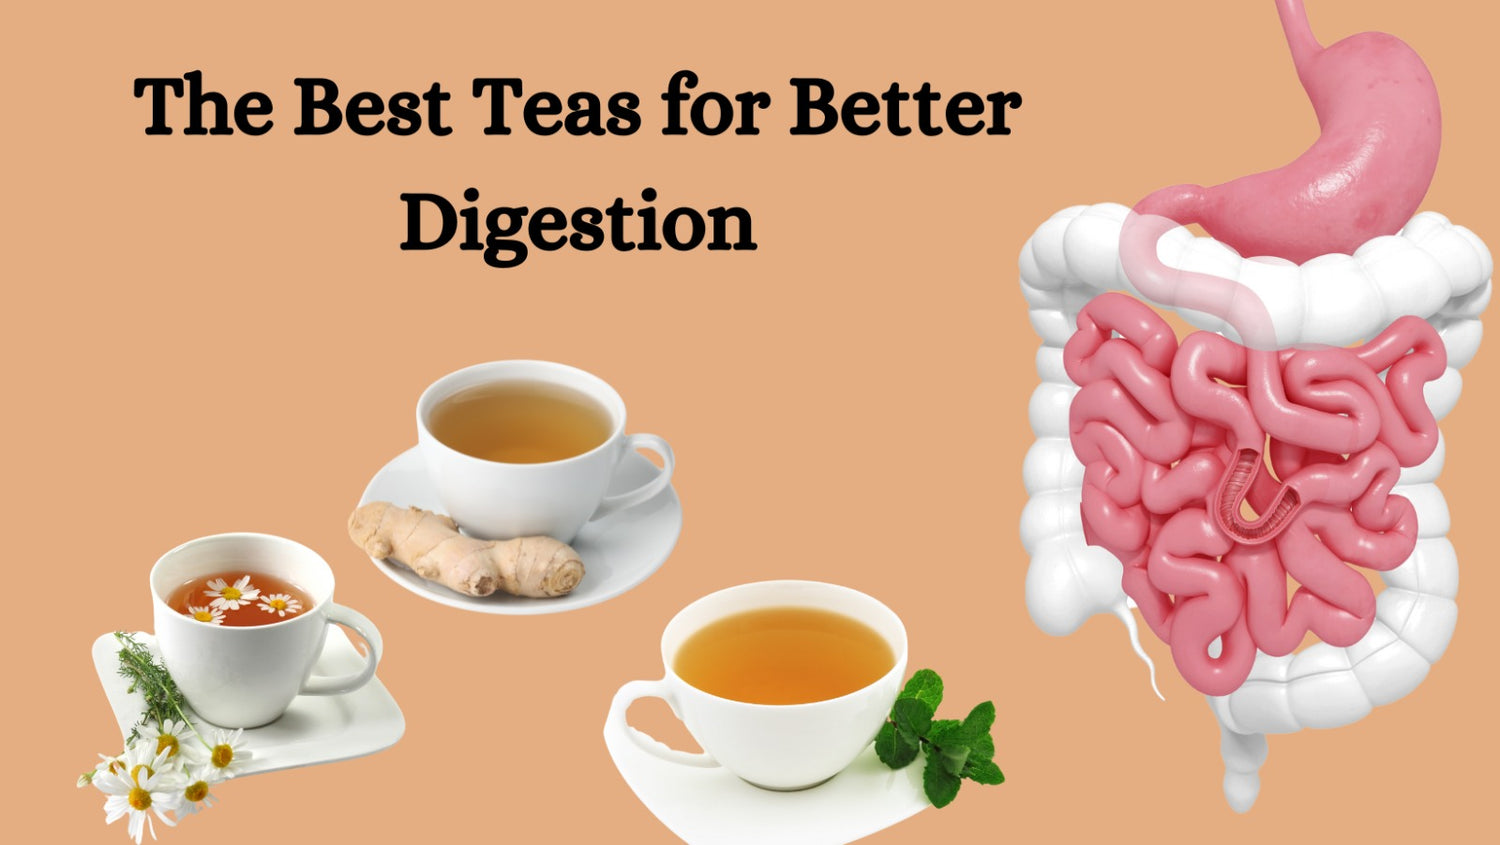 The Best Teas for Better Digestion